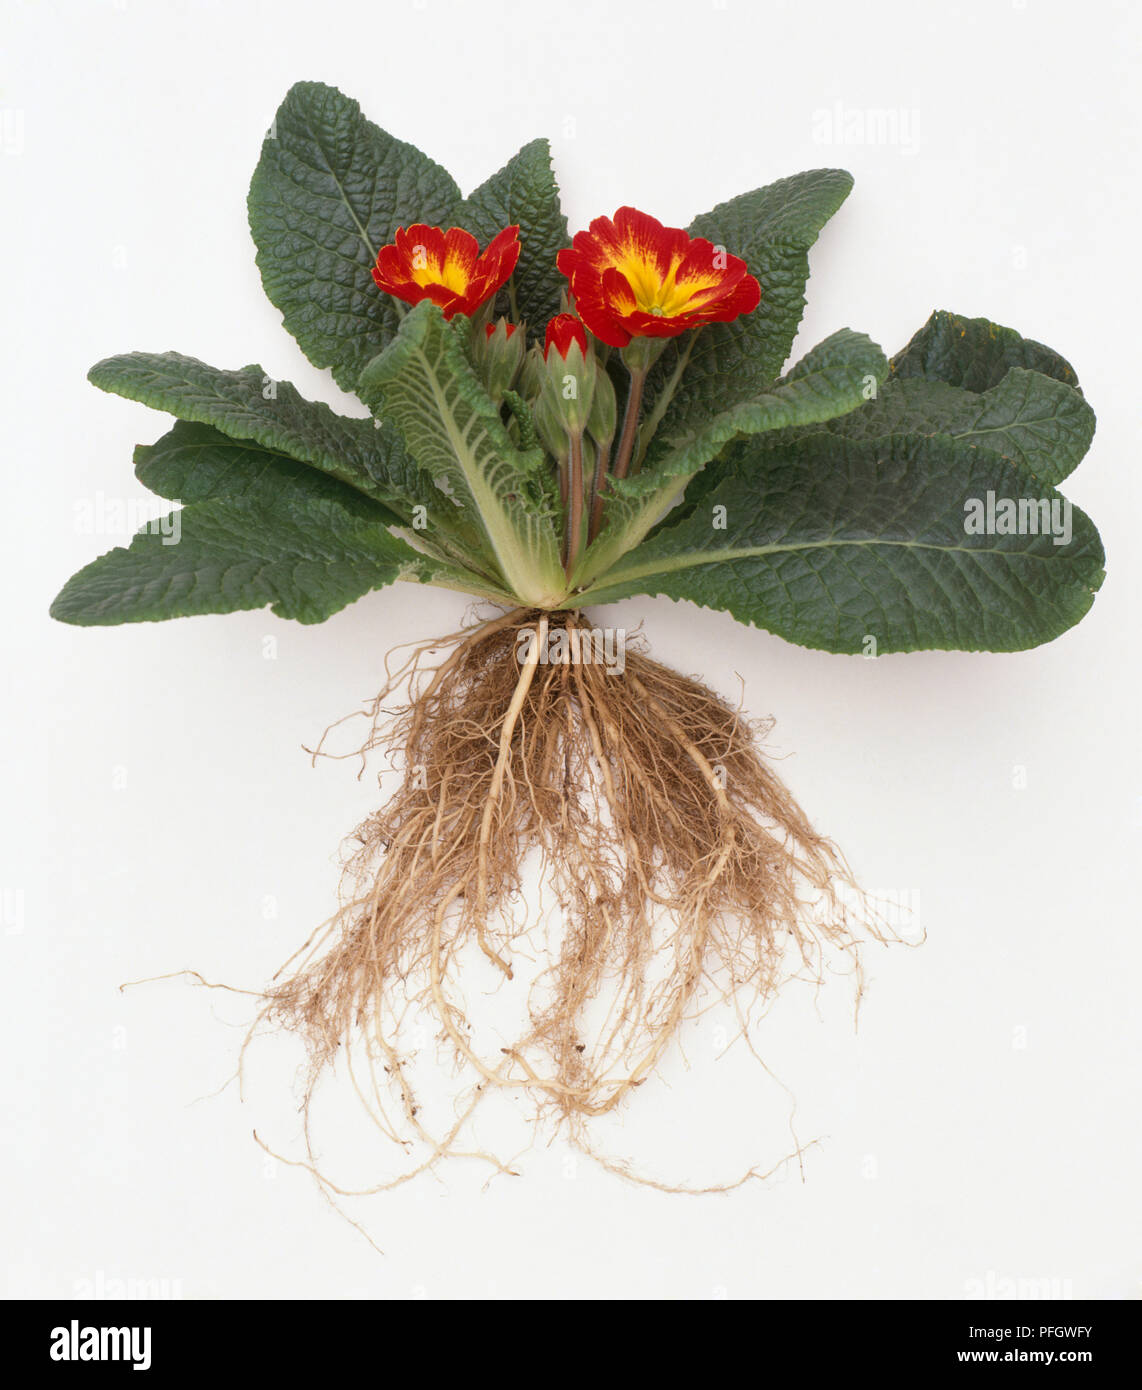 Primula, showing buds, flower heads, leaves and roots, close-up Stock Photo